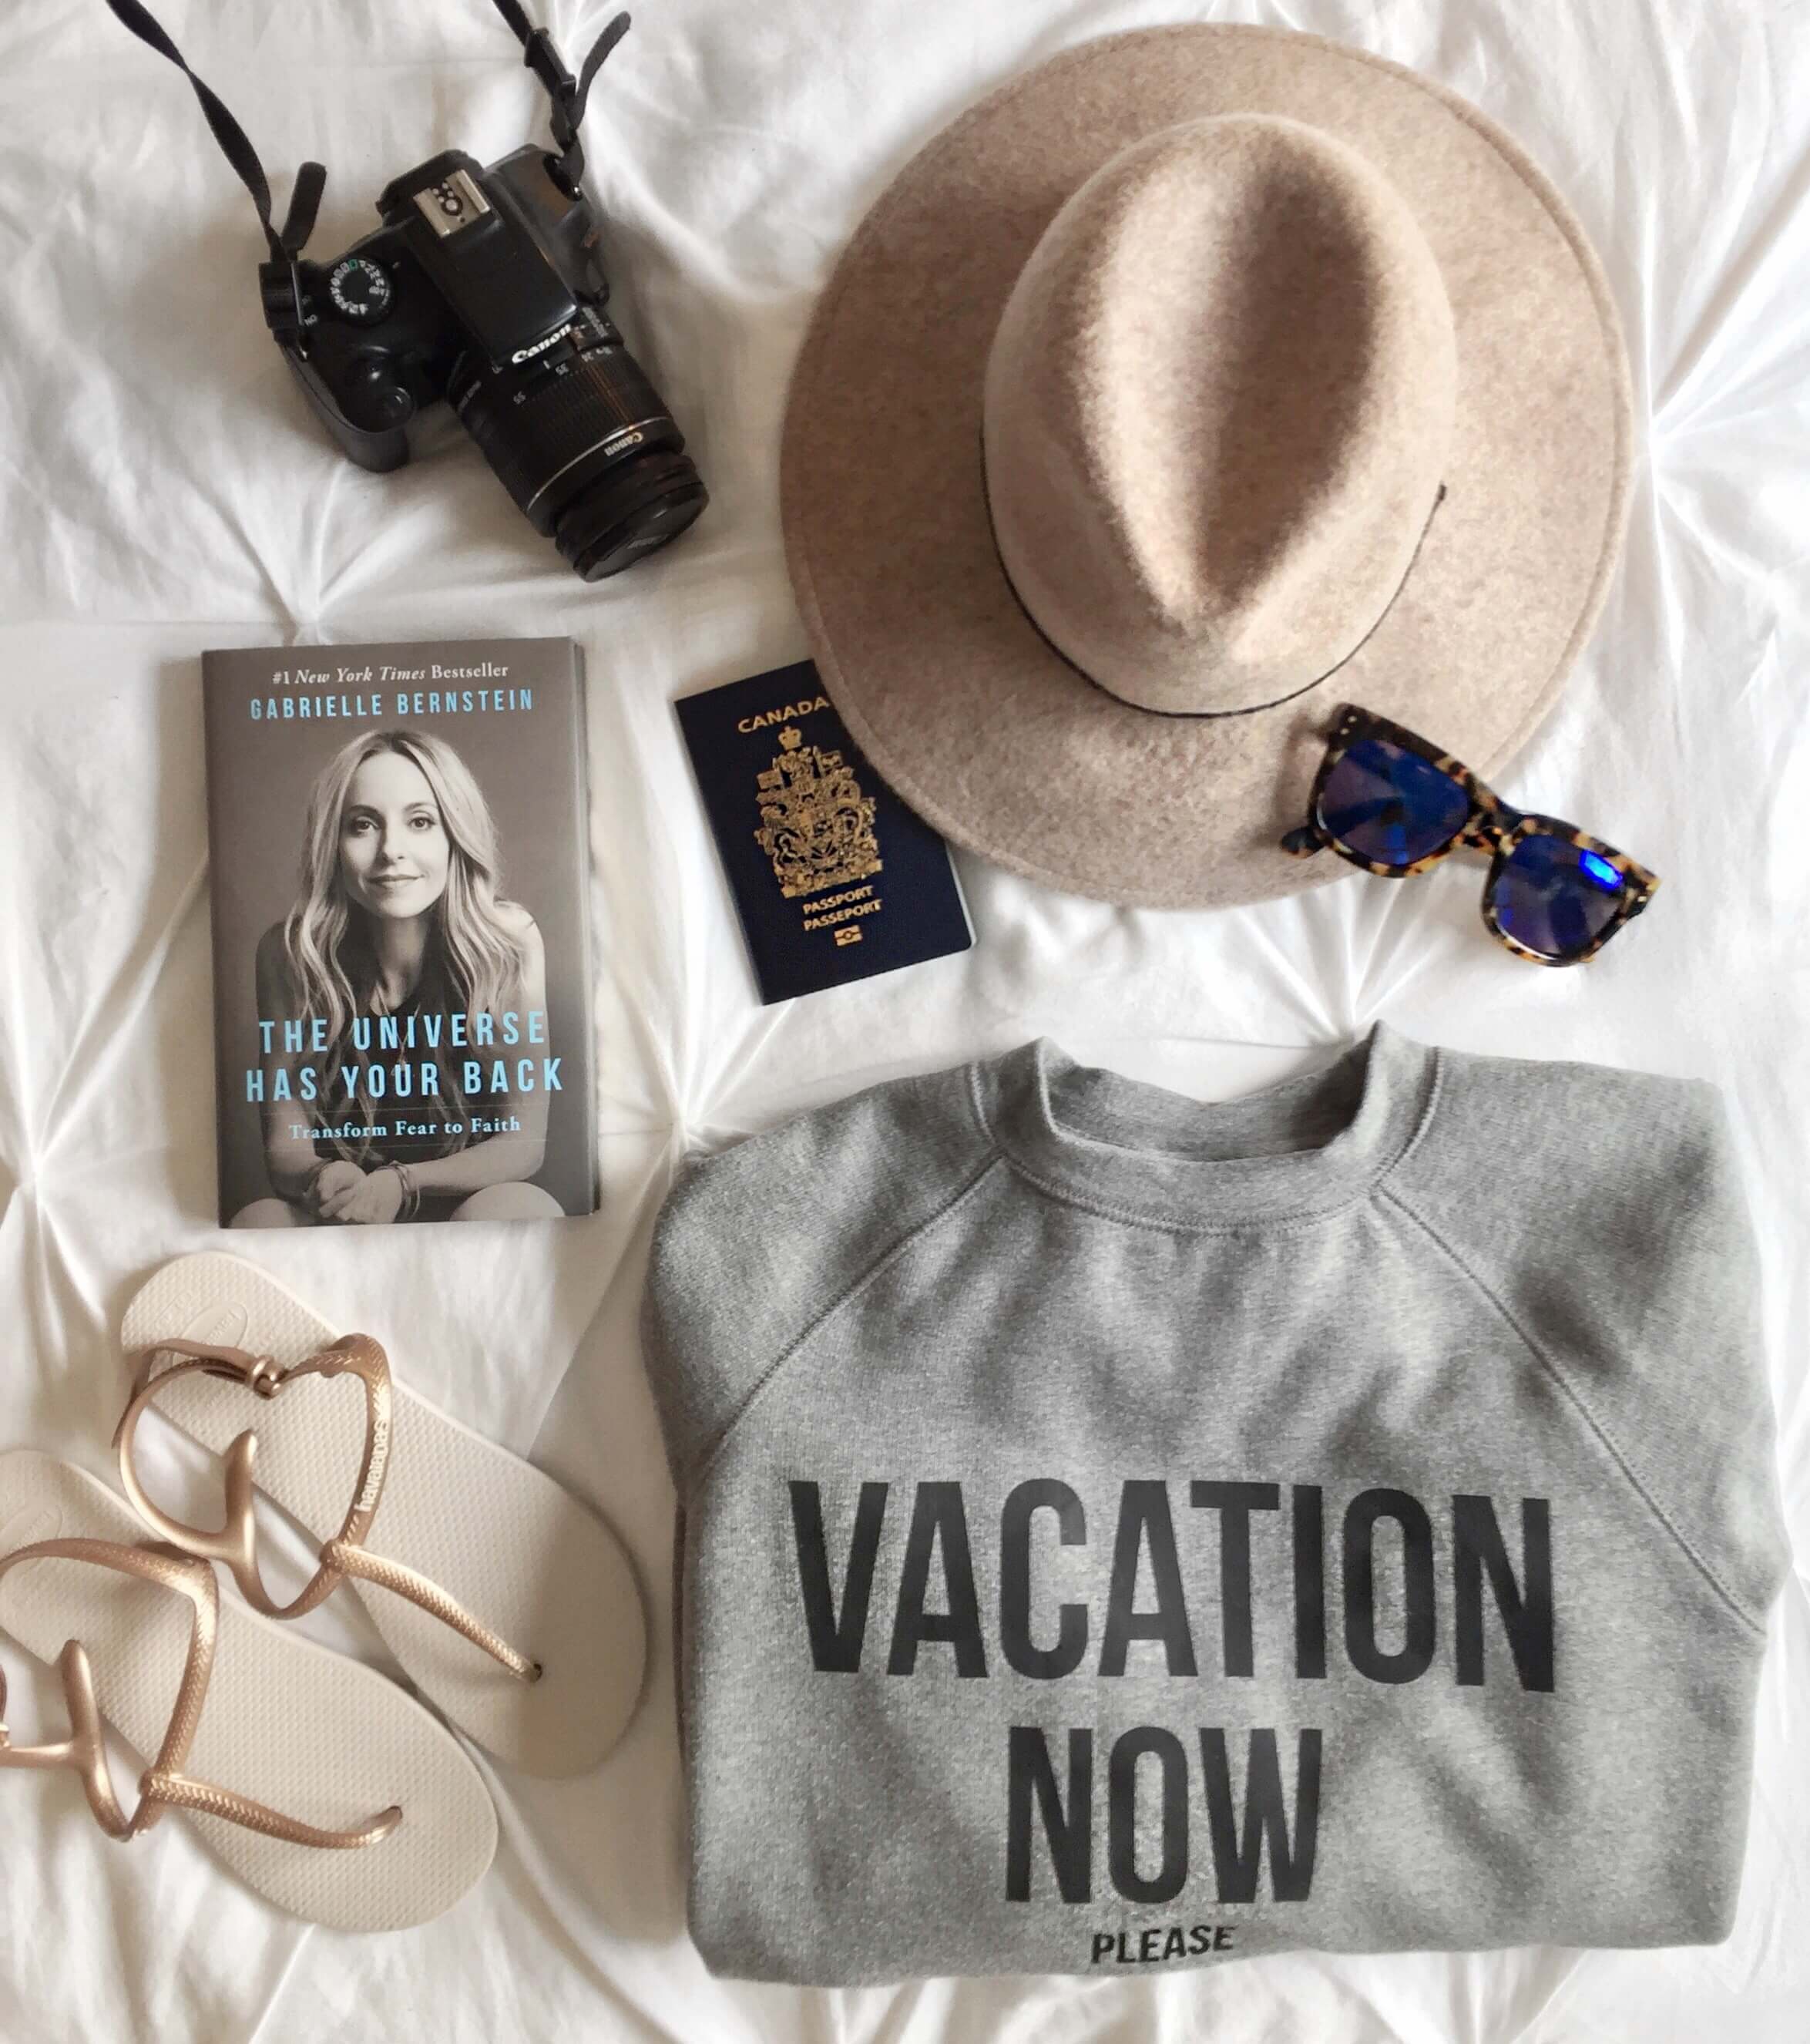 A flat lay from a girl packing up for Palm springs. Items include a hat, book, sunglasses, passport, sandals and hat.